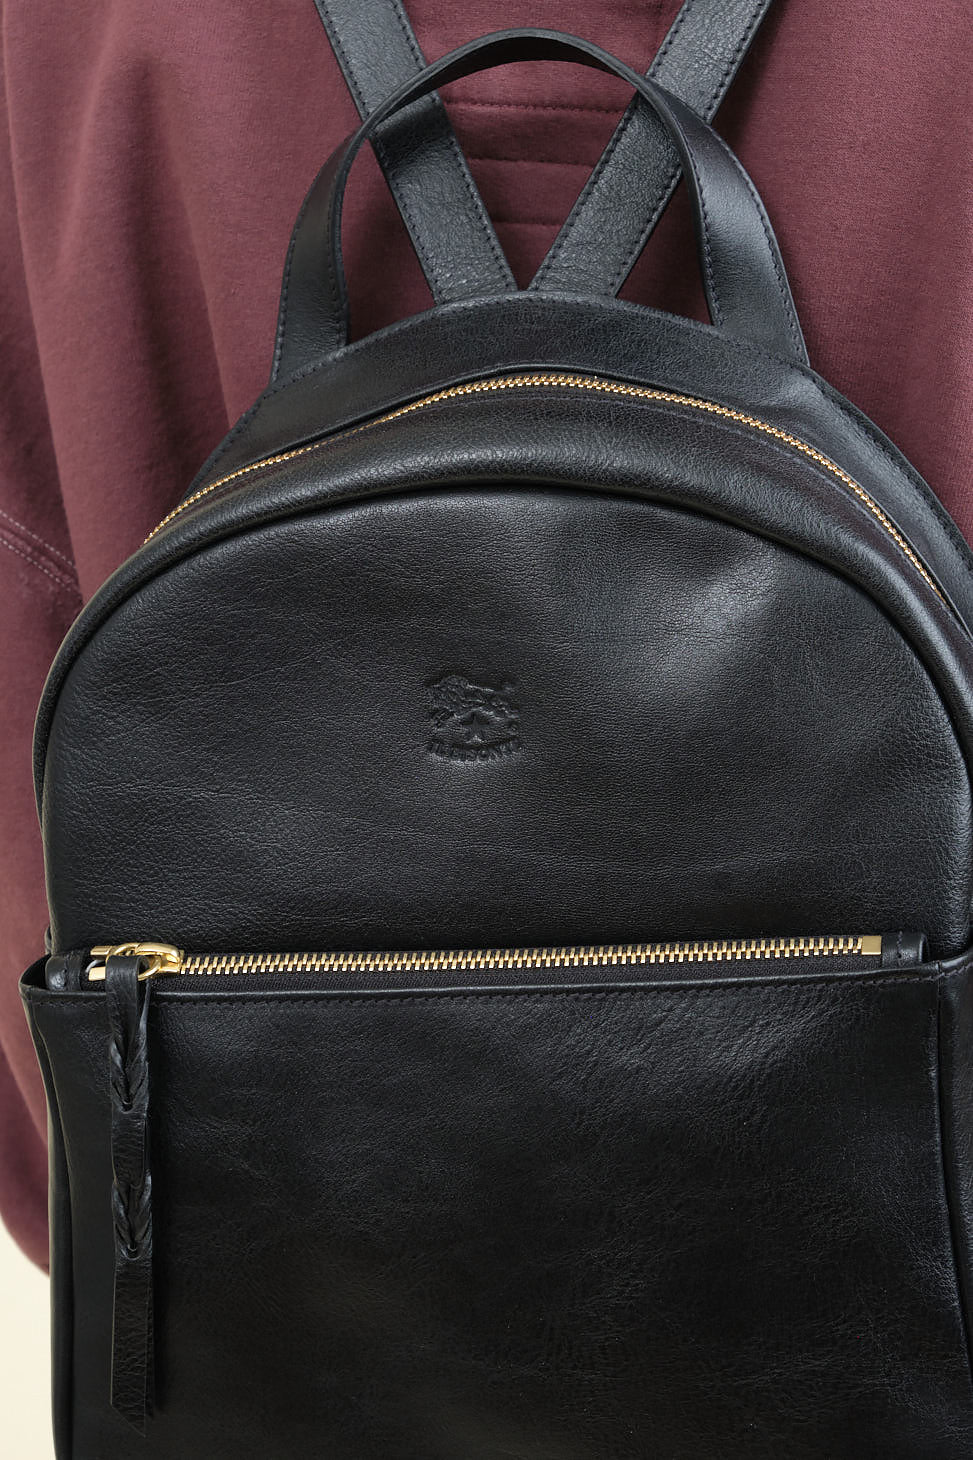 Close up of Lungarno Backpack Bag